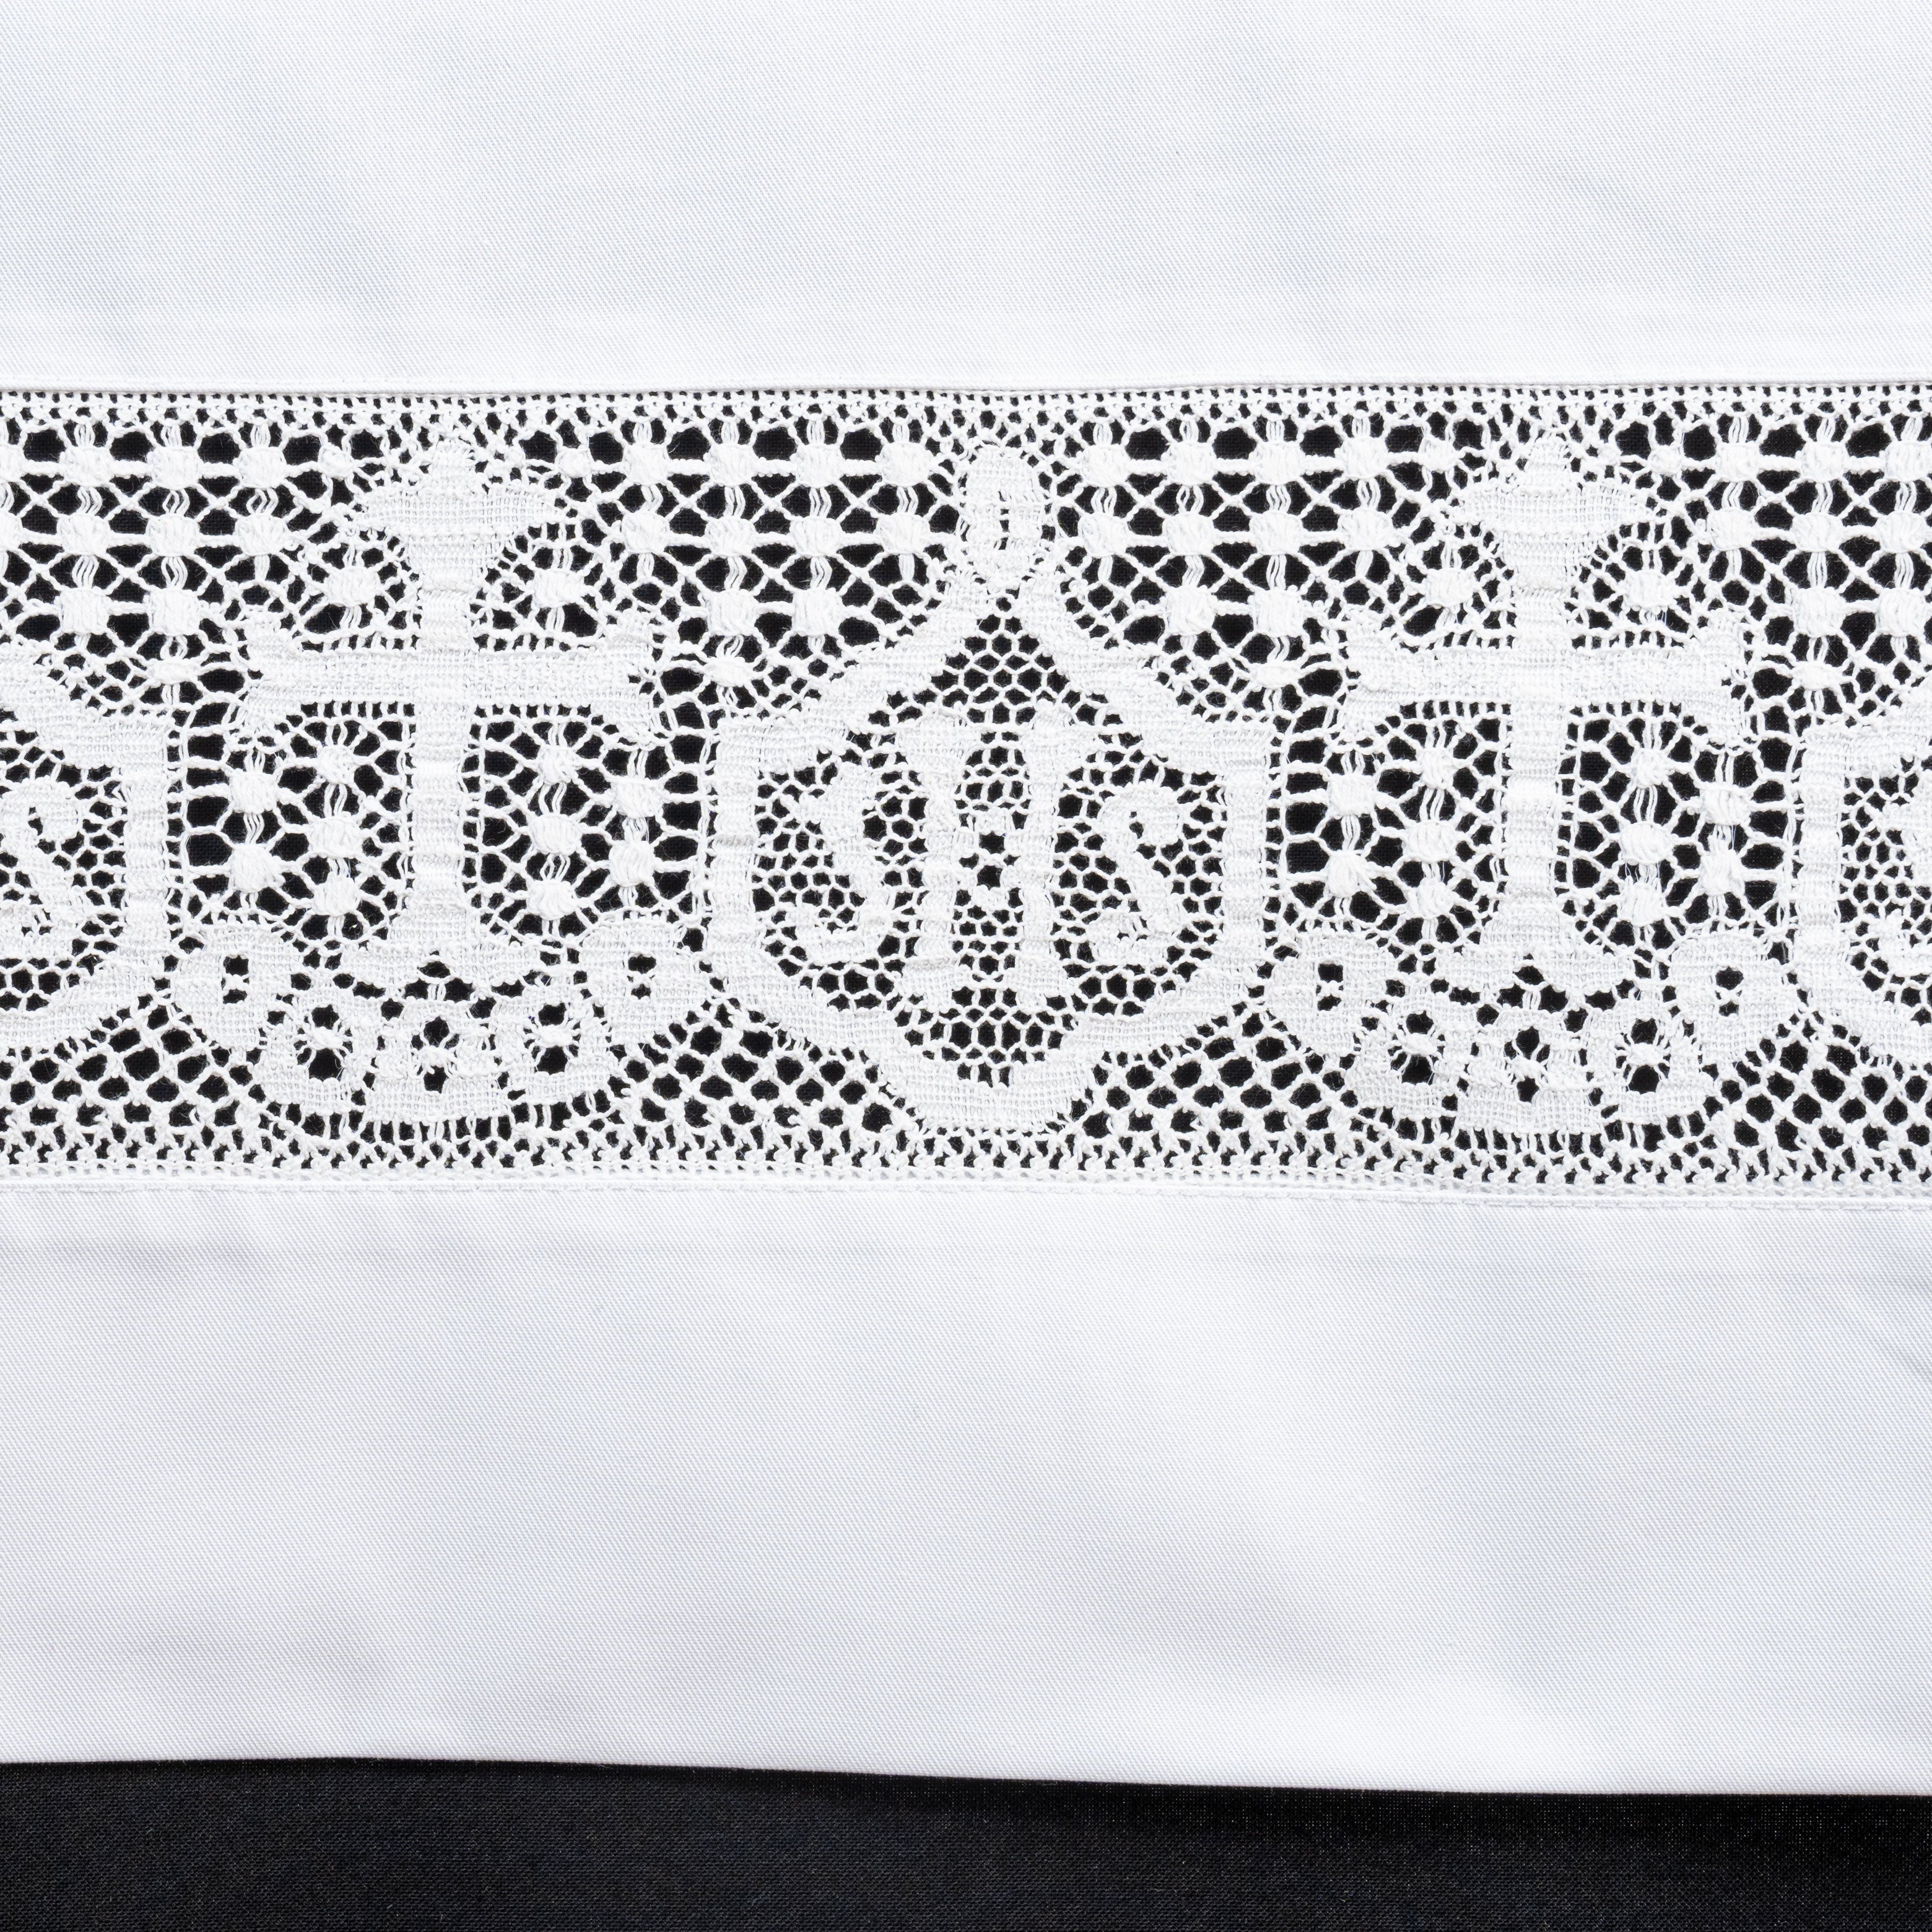 Lace Insert for Altar Cloth | JHS Motif